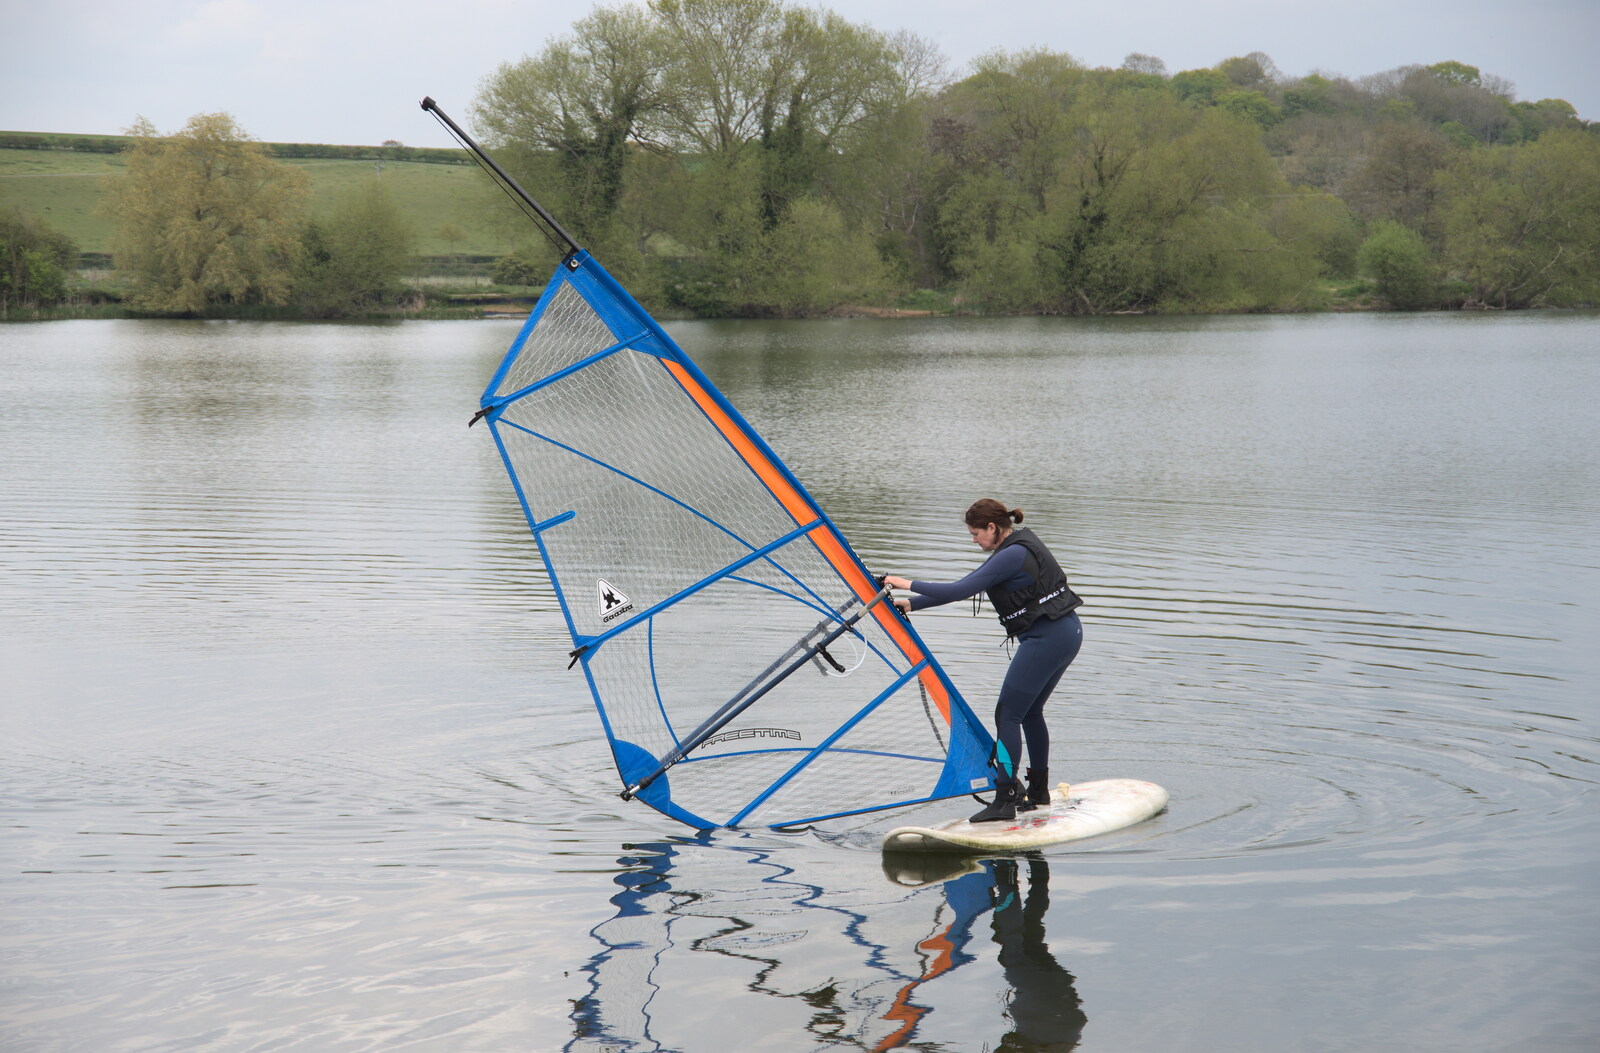 The Canoe's First Outing, Weybread Lake, Harleston - 1st May 2022: Isobel goes windsurfing